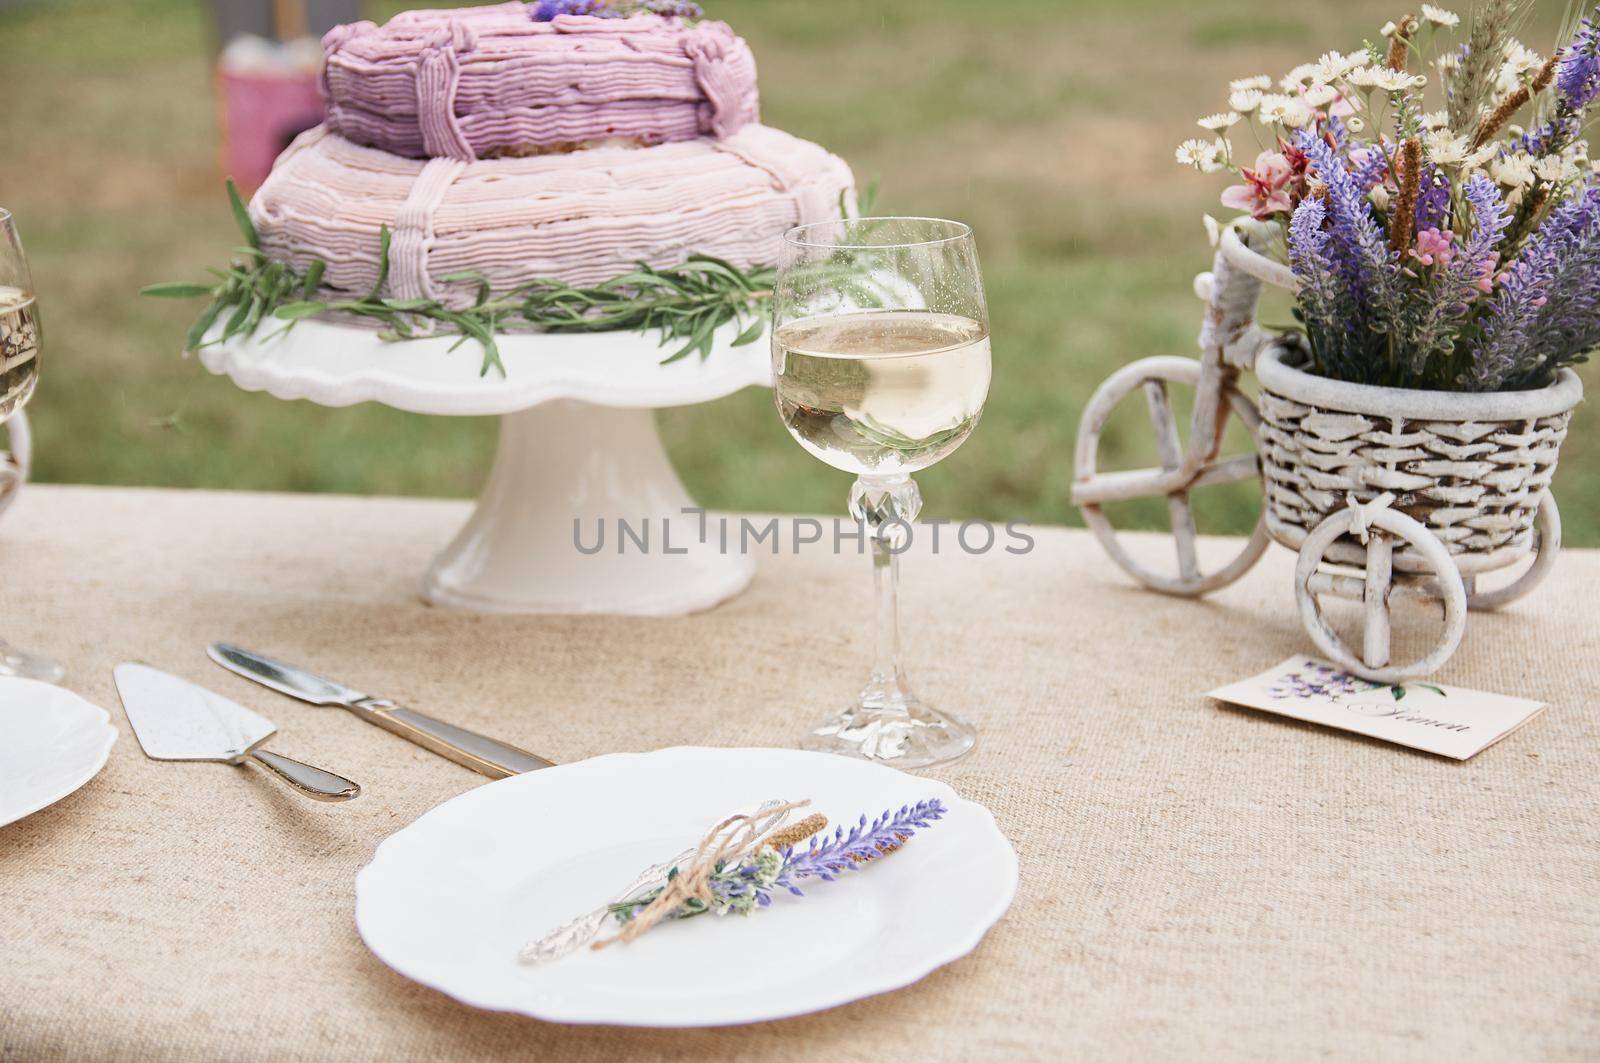 rustic style butter cake on a festive table with a glass of white wine